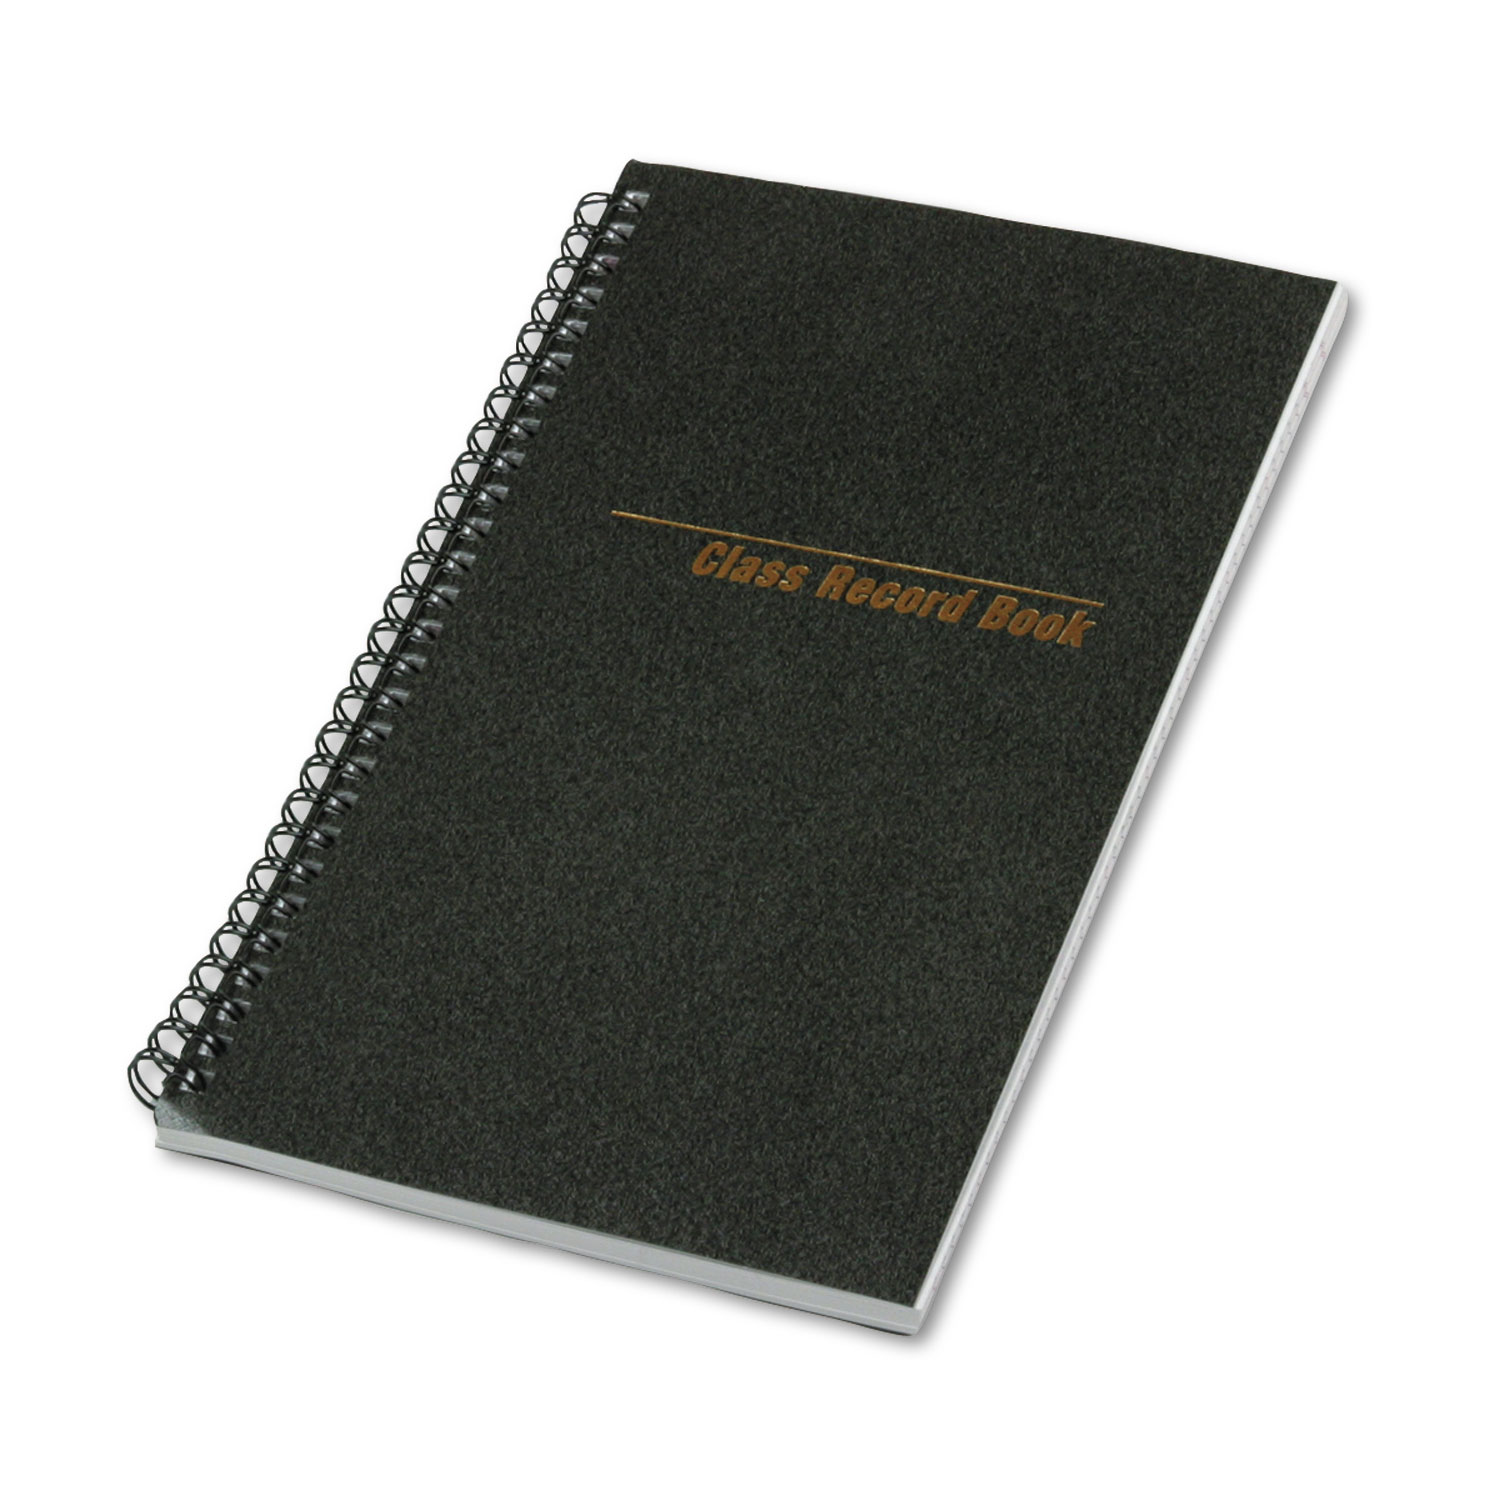 Class Record Book, 6-Day/6-Week Format, 9-1/2 x 5-3/4, Black, 120 Pages